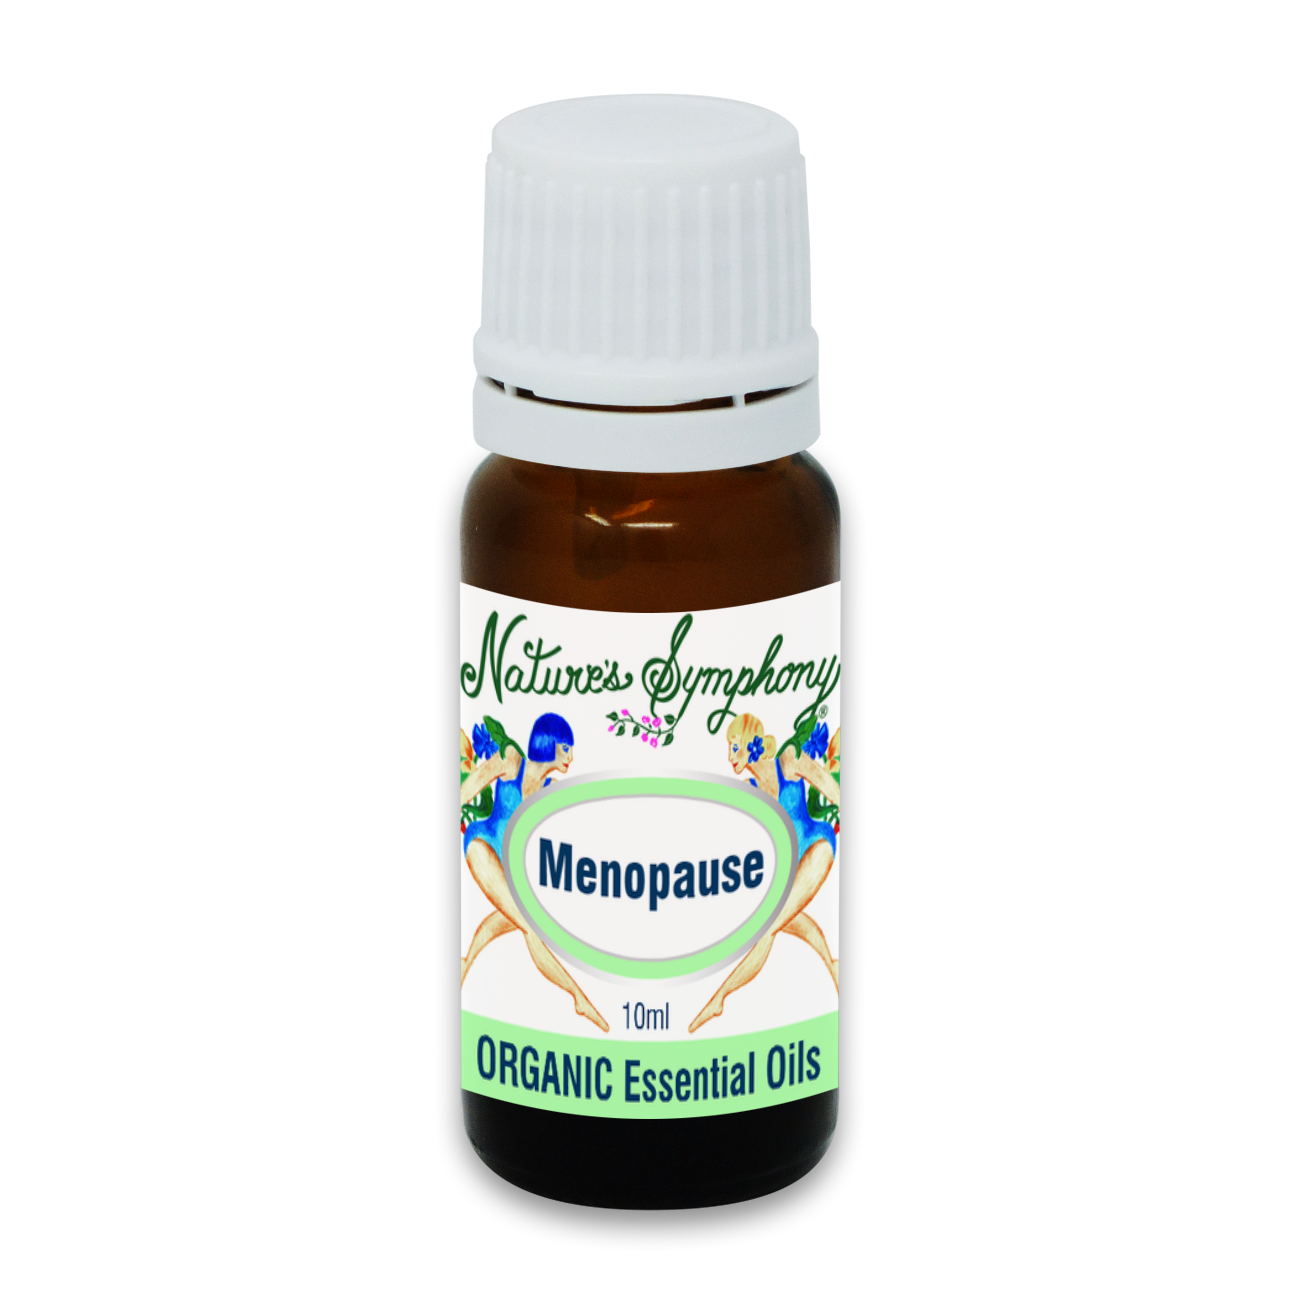 Hot Flushes/Menopause, Organic/Wildcrafted blend - 10ml